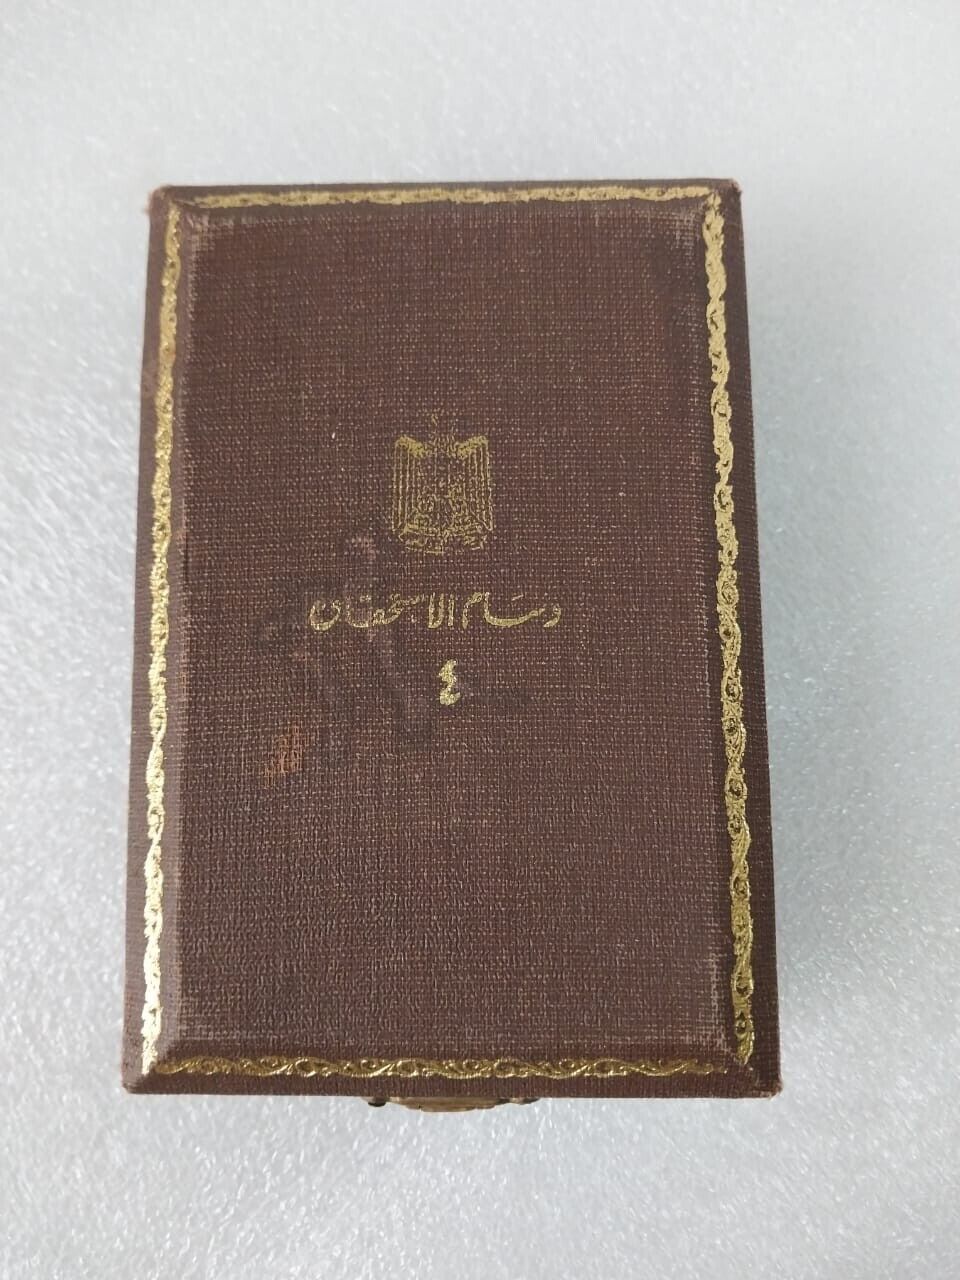 1953 Egypt Military Order of the Republic 4th class Medal Box Only الاستحقاق